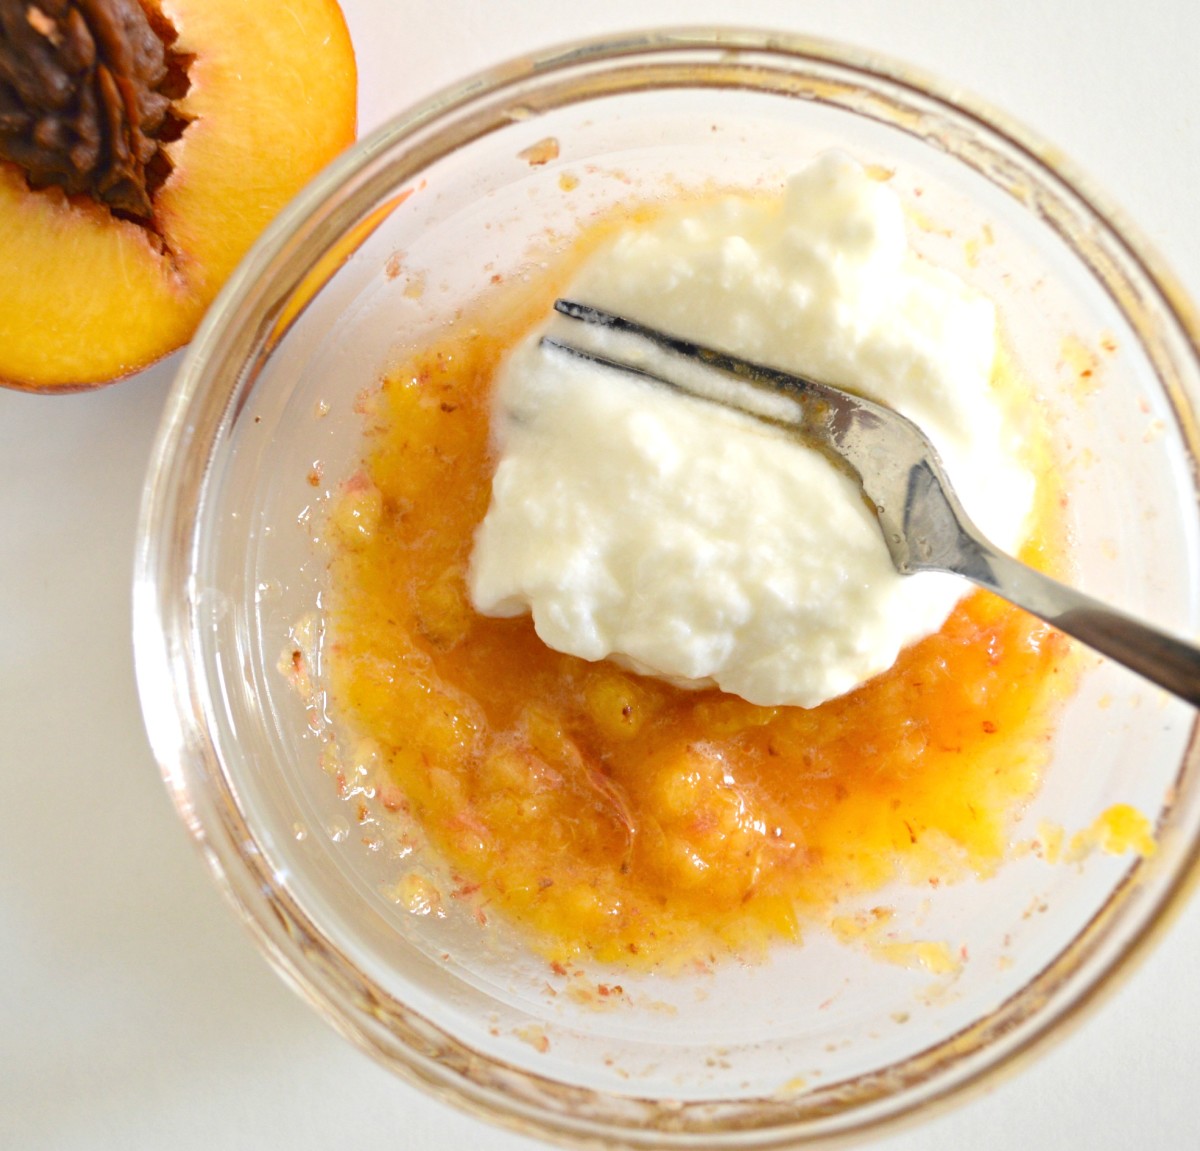 Mix yogurt and mashed peach  together in a bowl with a fork.